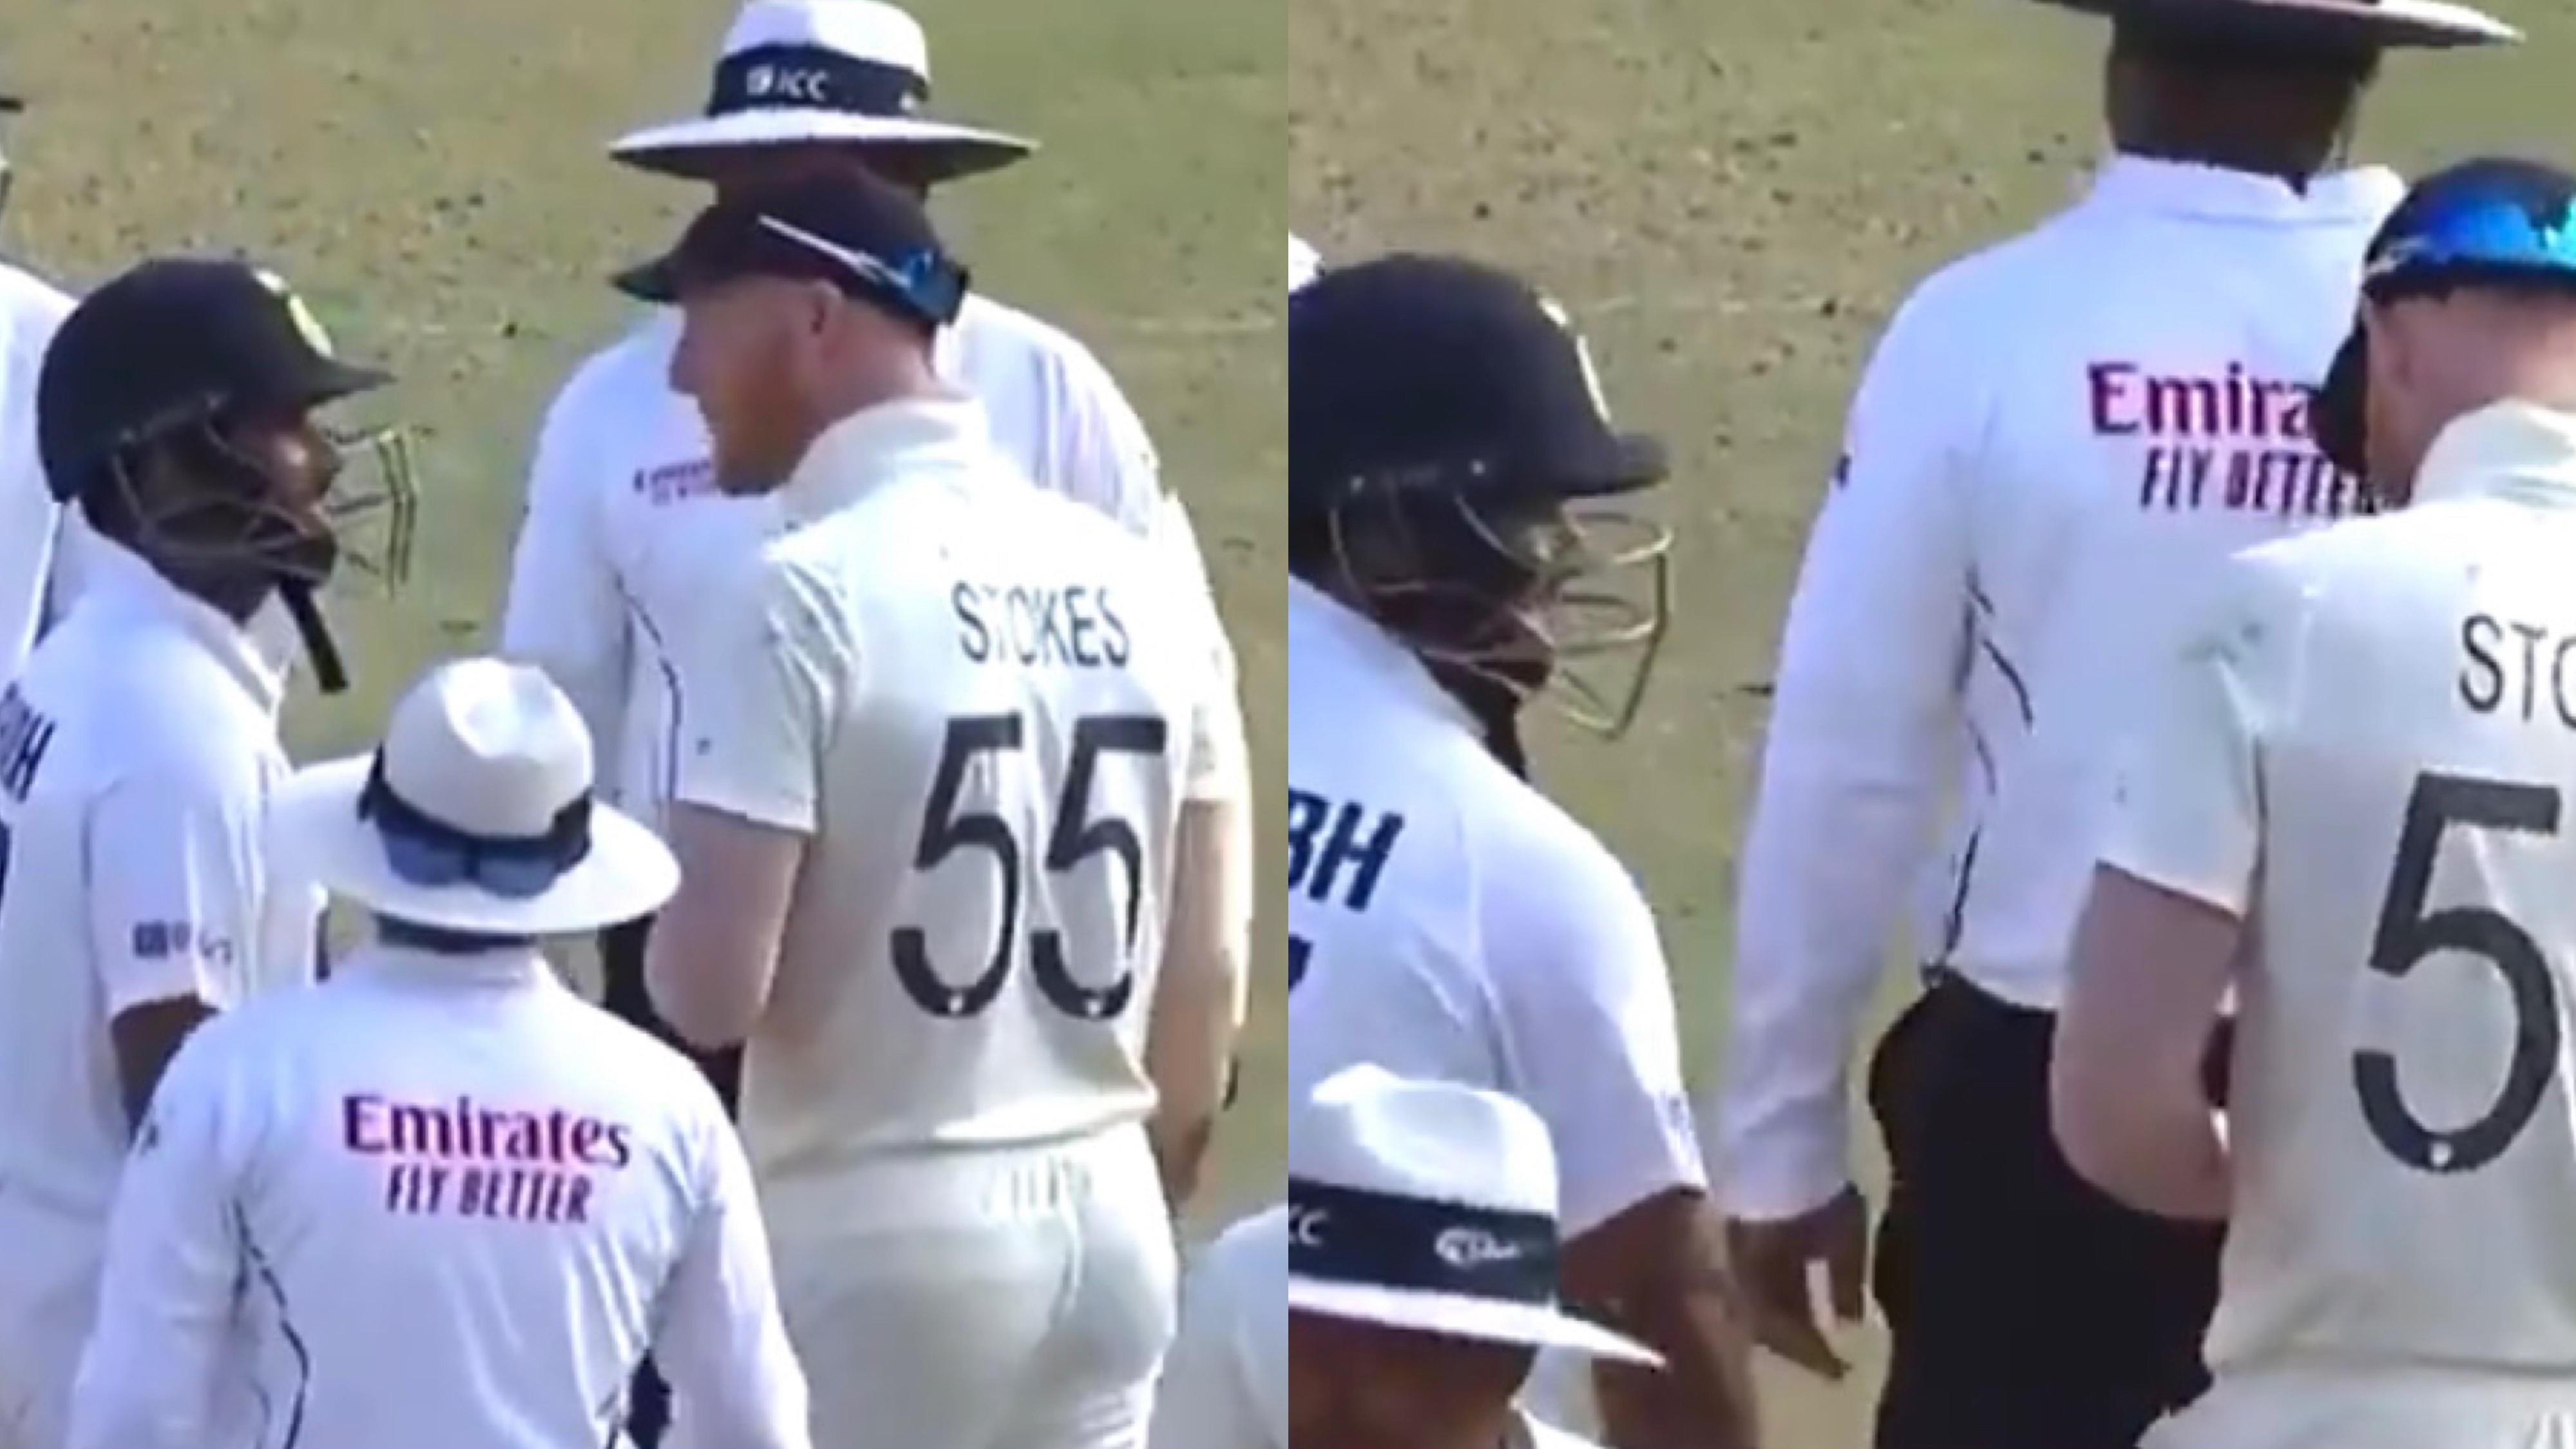 IND v ENG 2021: WATCH - Rishabh Pant, Ben Stokes get involved in argument before stumps